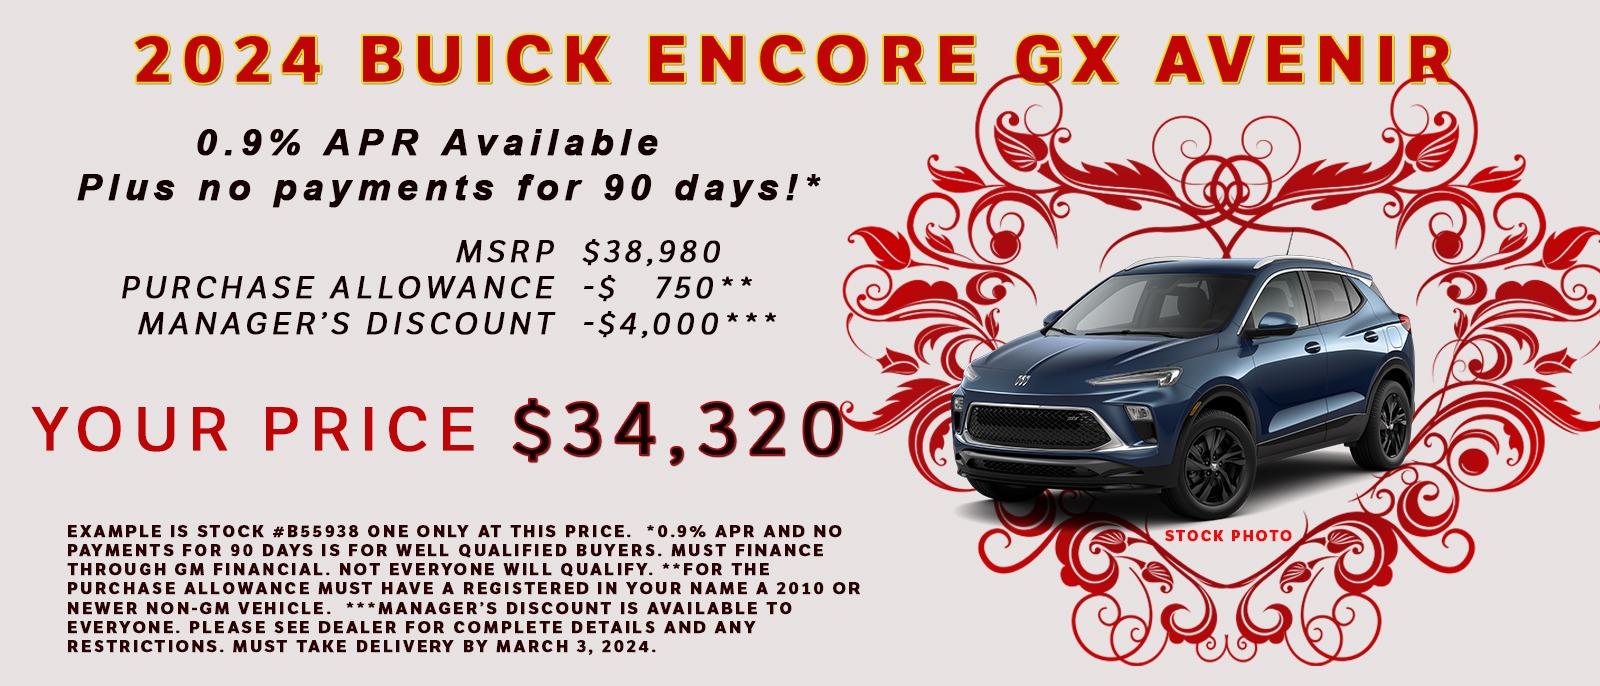 Get a fantastic APR on your new Buick Encore GX